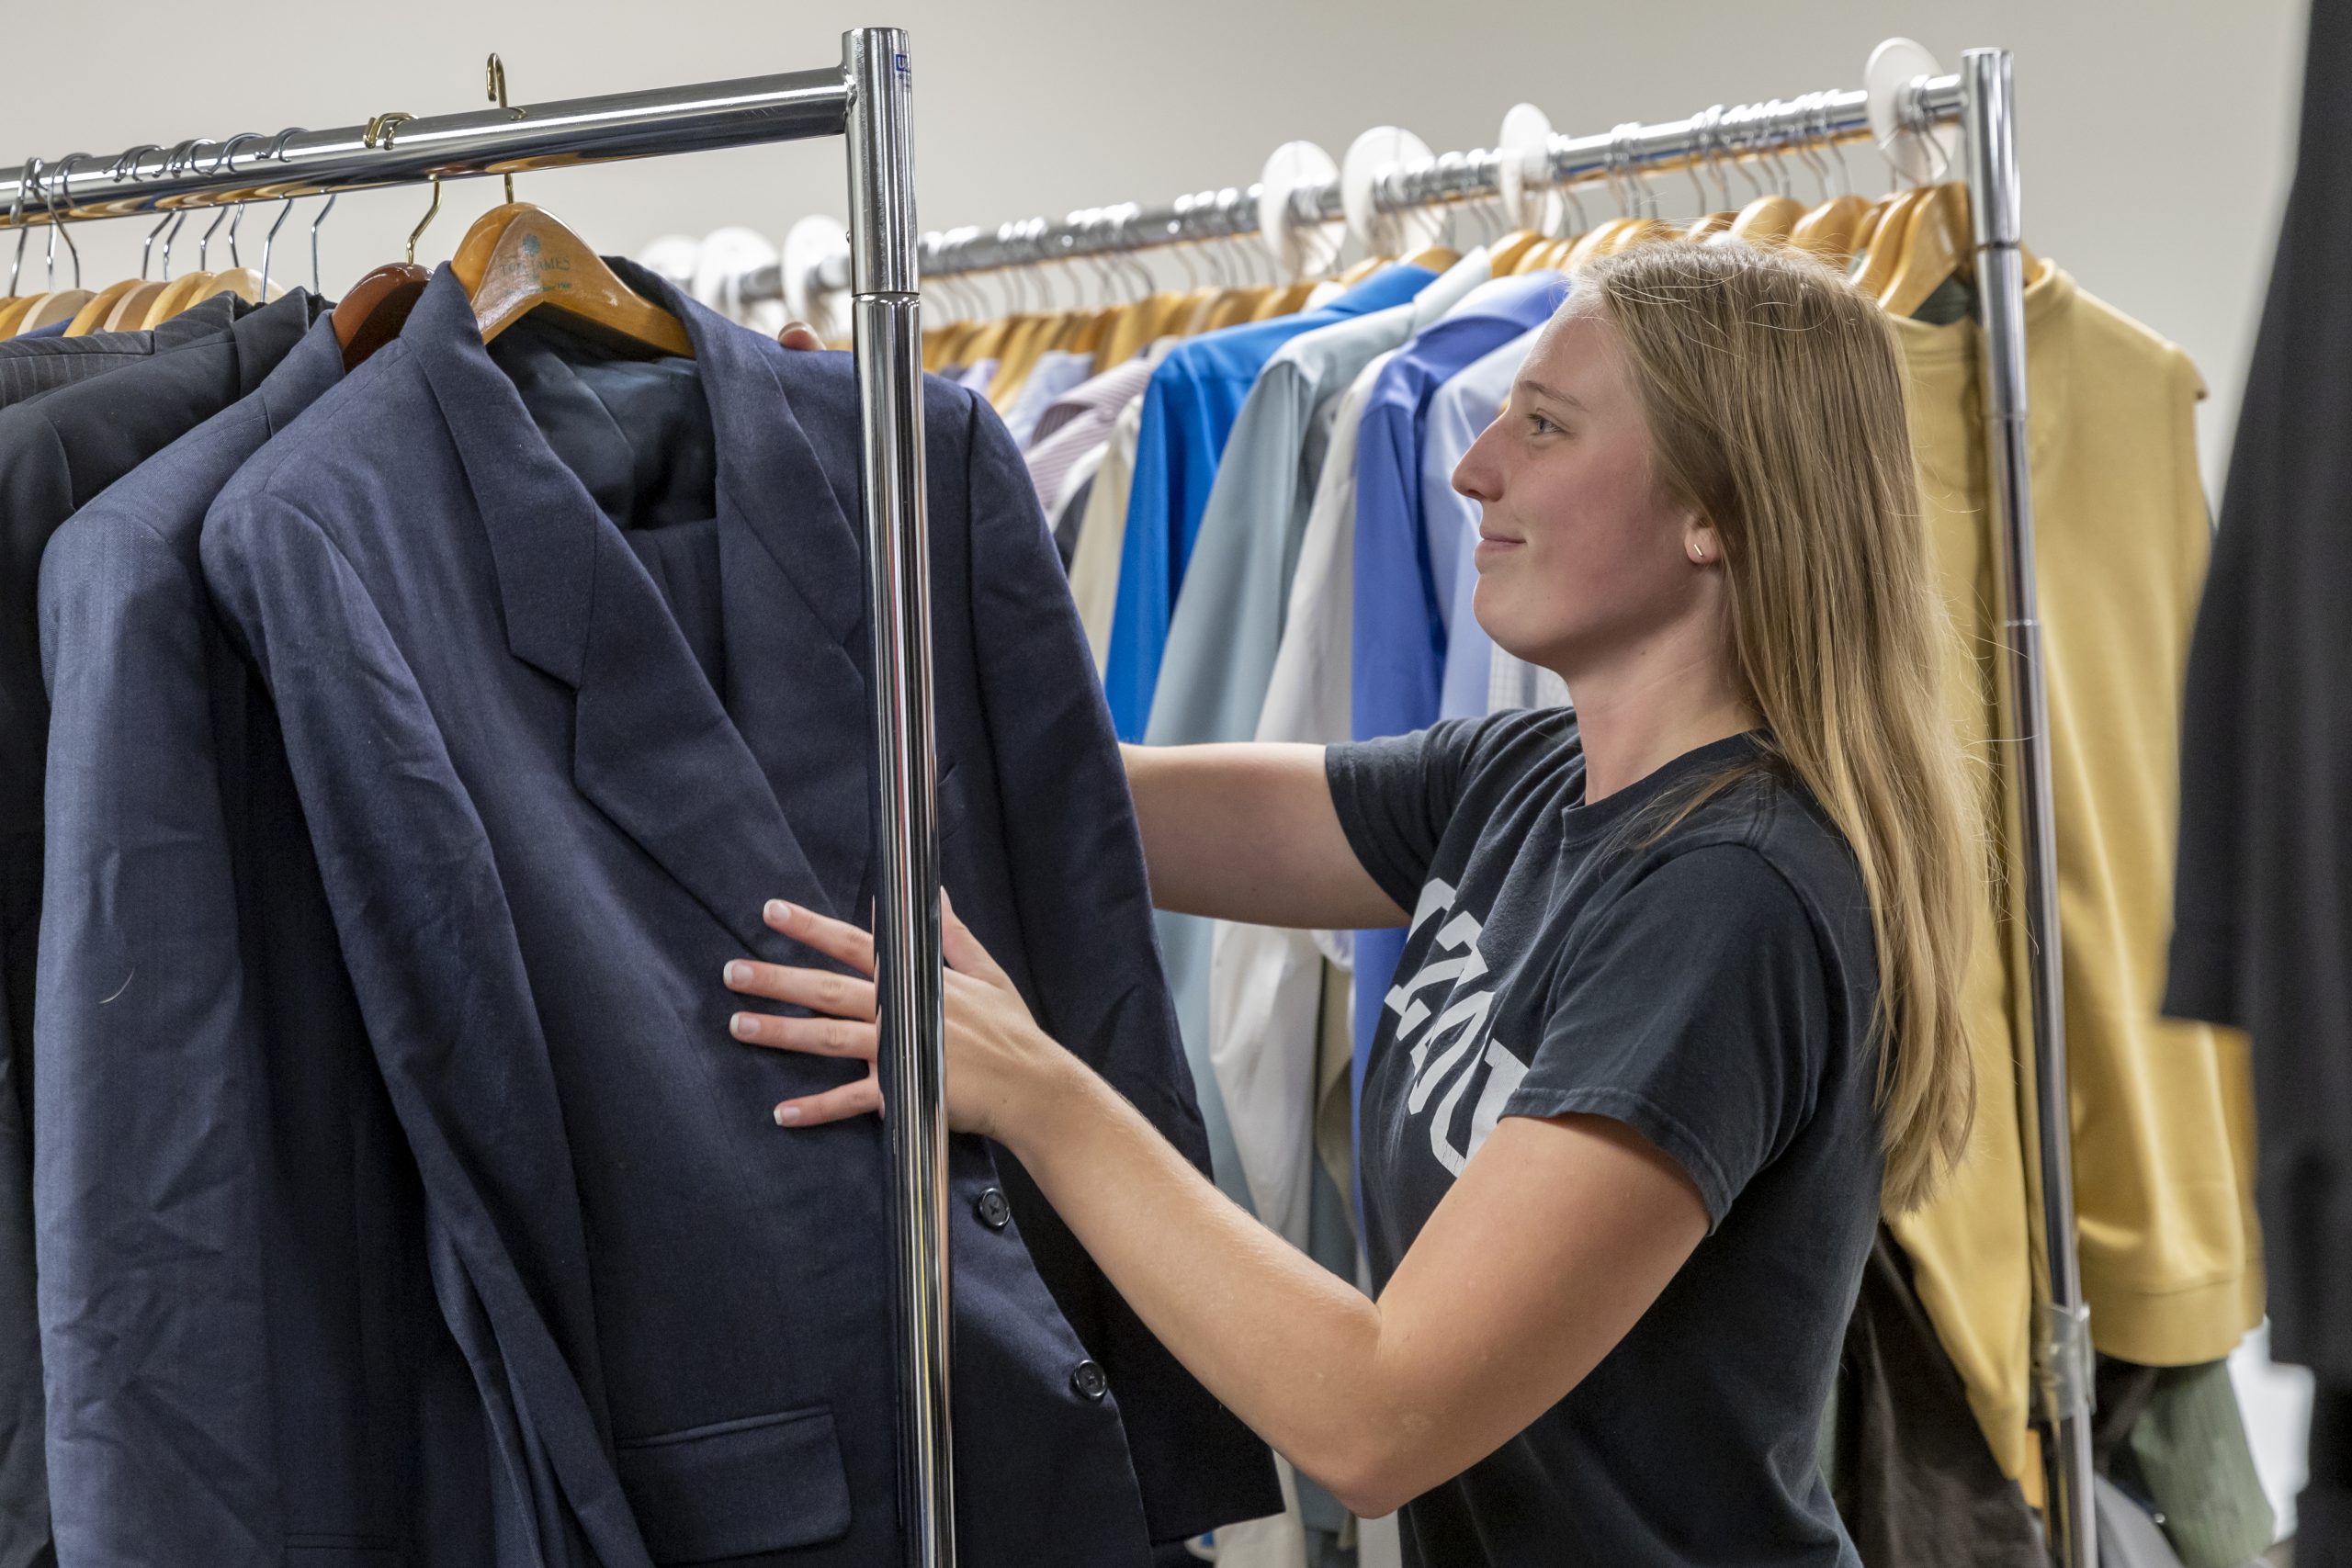 Students use the services at Truman's Closet